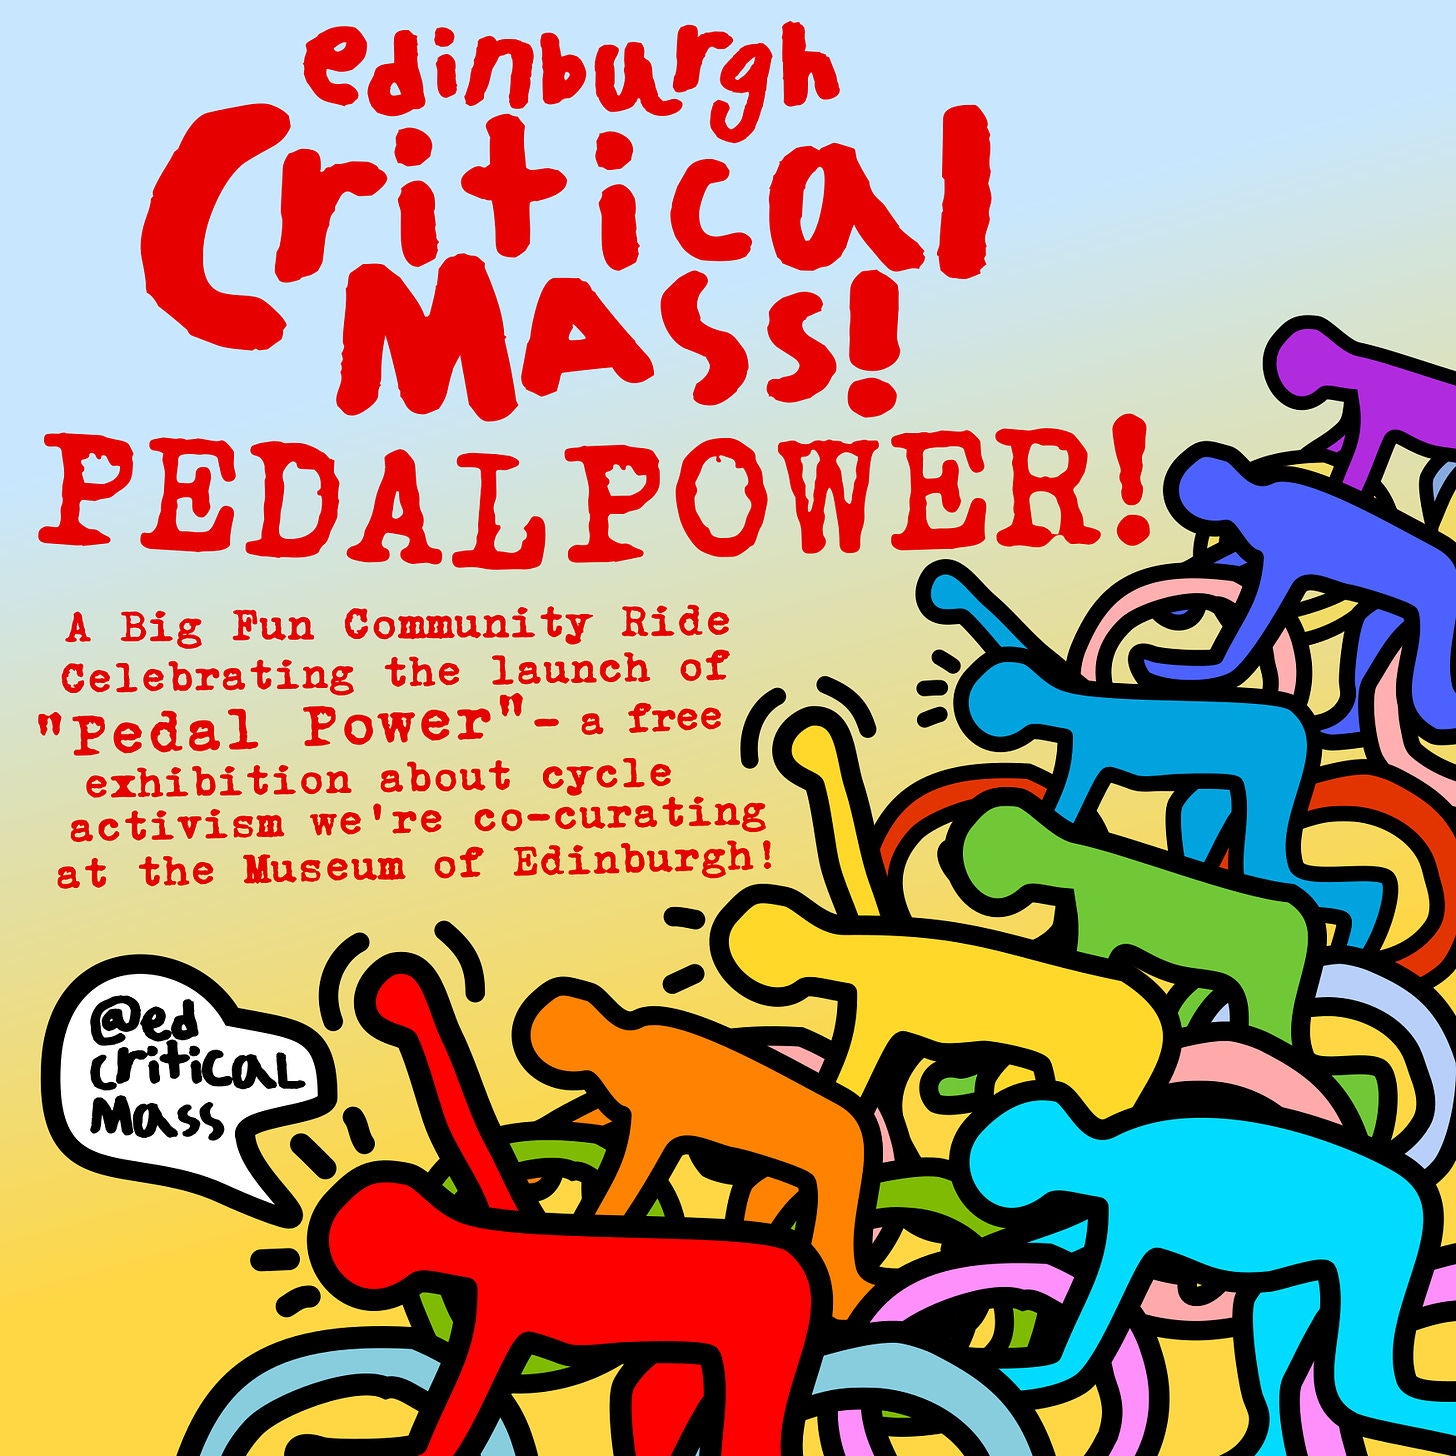 Edinburgh Critical Mass! Pedal Power! A big fun community ride celebrating the launch of “Pedal Power” - a free exhibition about cycle activism we’re co-curating at the Museum of Edinburgh. @edcriticalmass